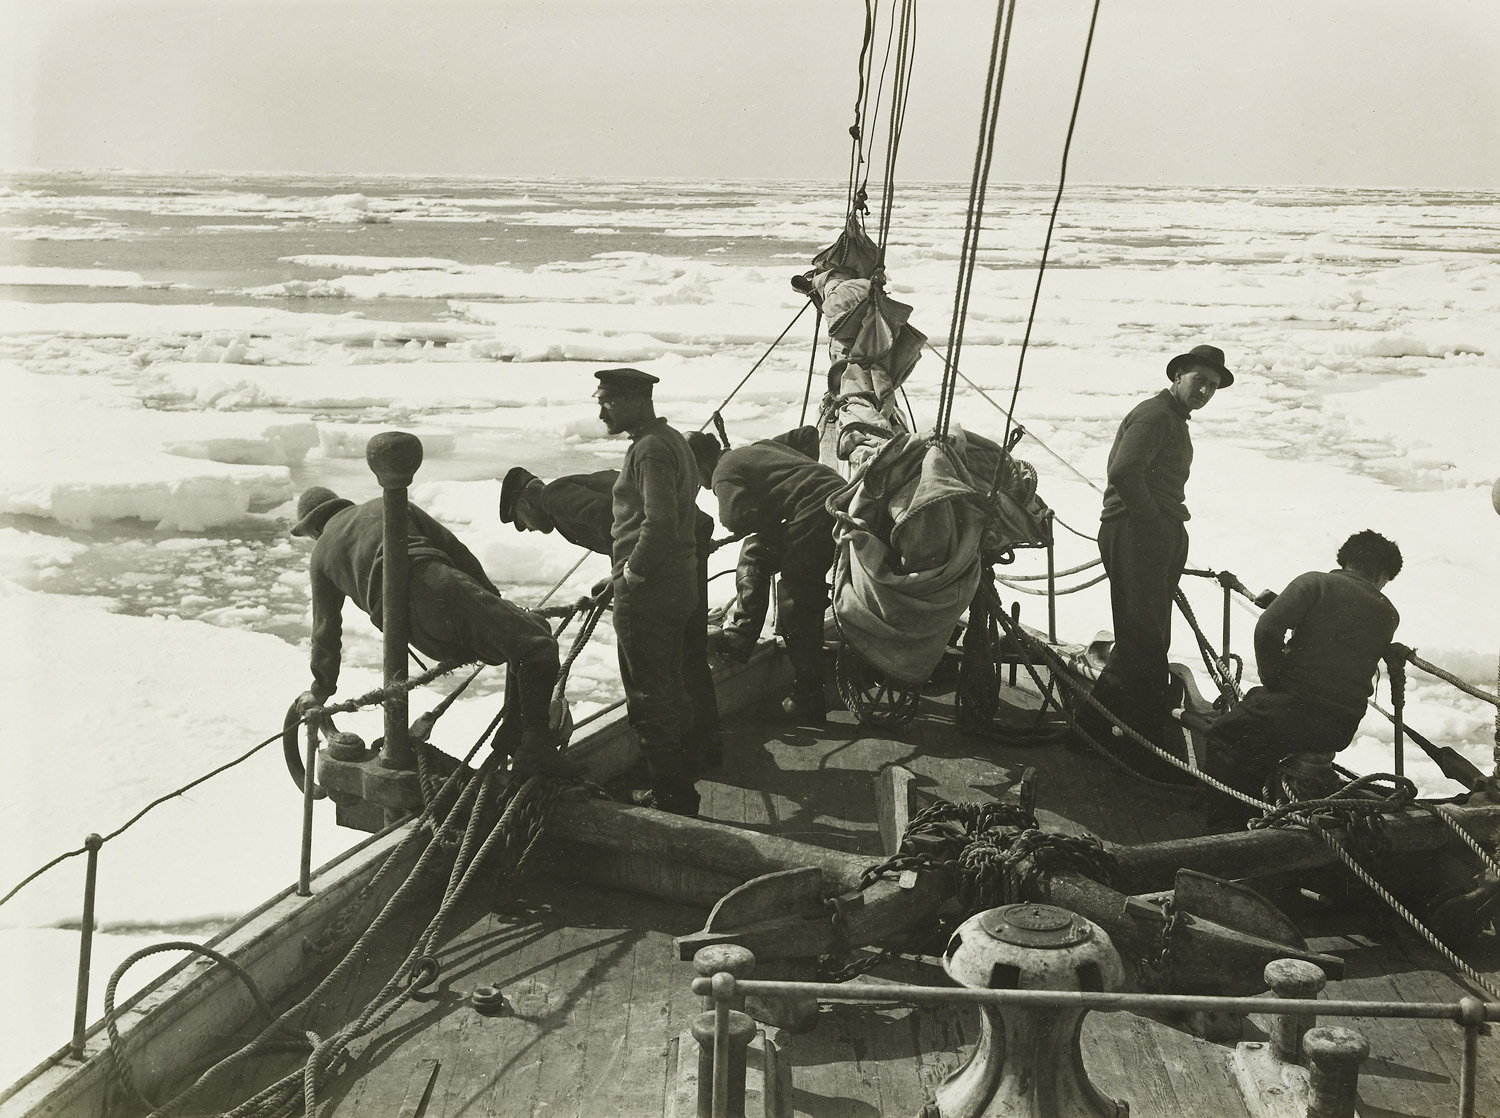 The Endurance entering the pack ice of Weddell Sea in order to reach the coast of Antarctica, on December 9, 1914.